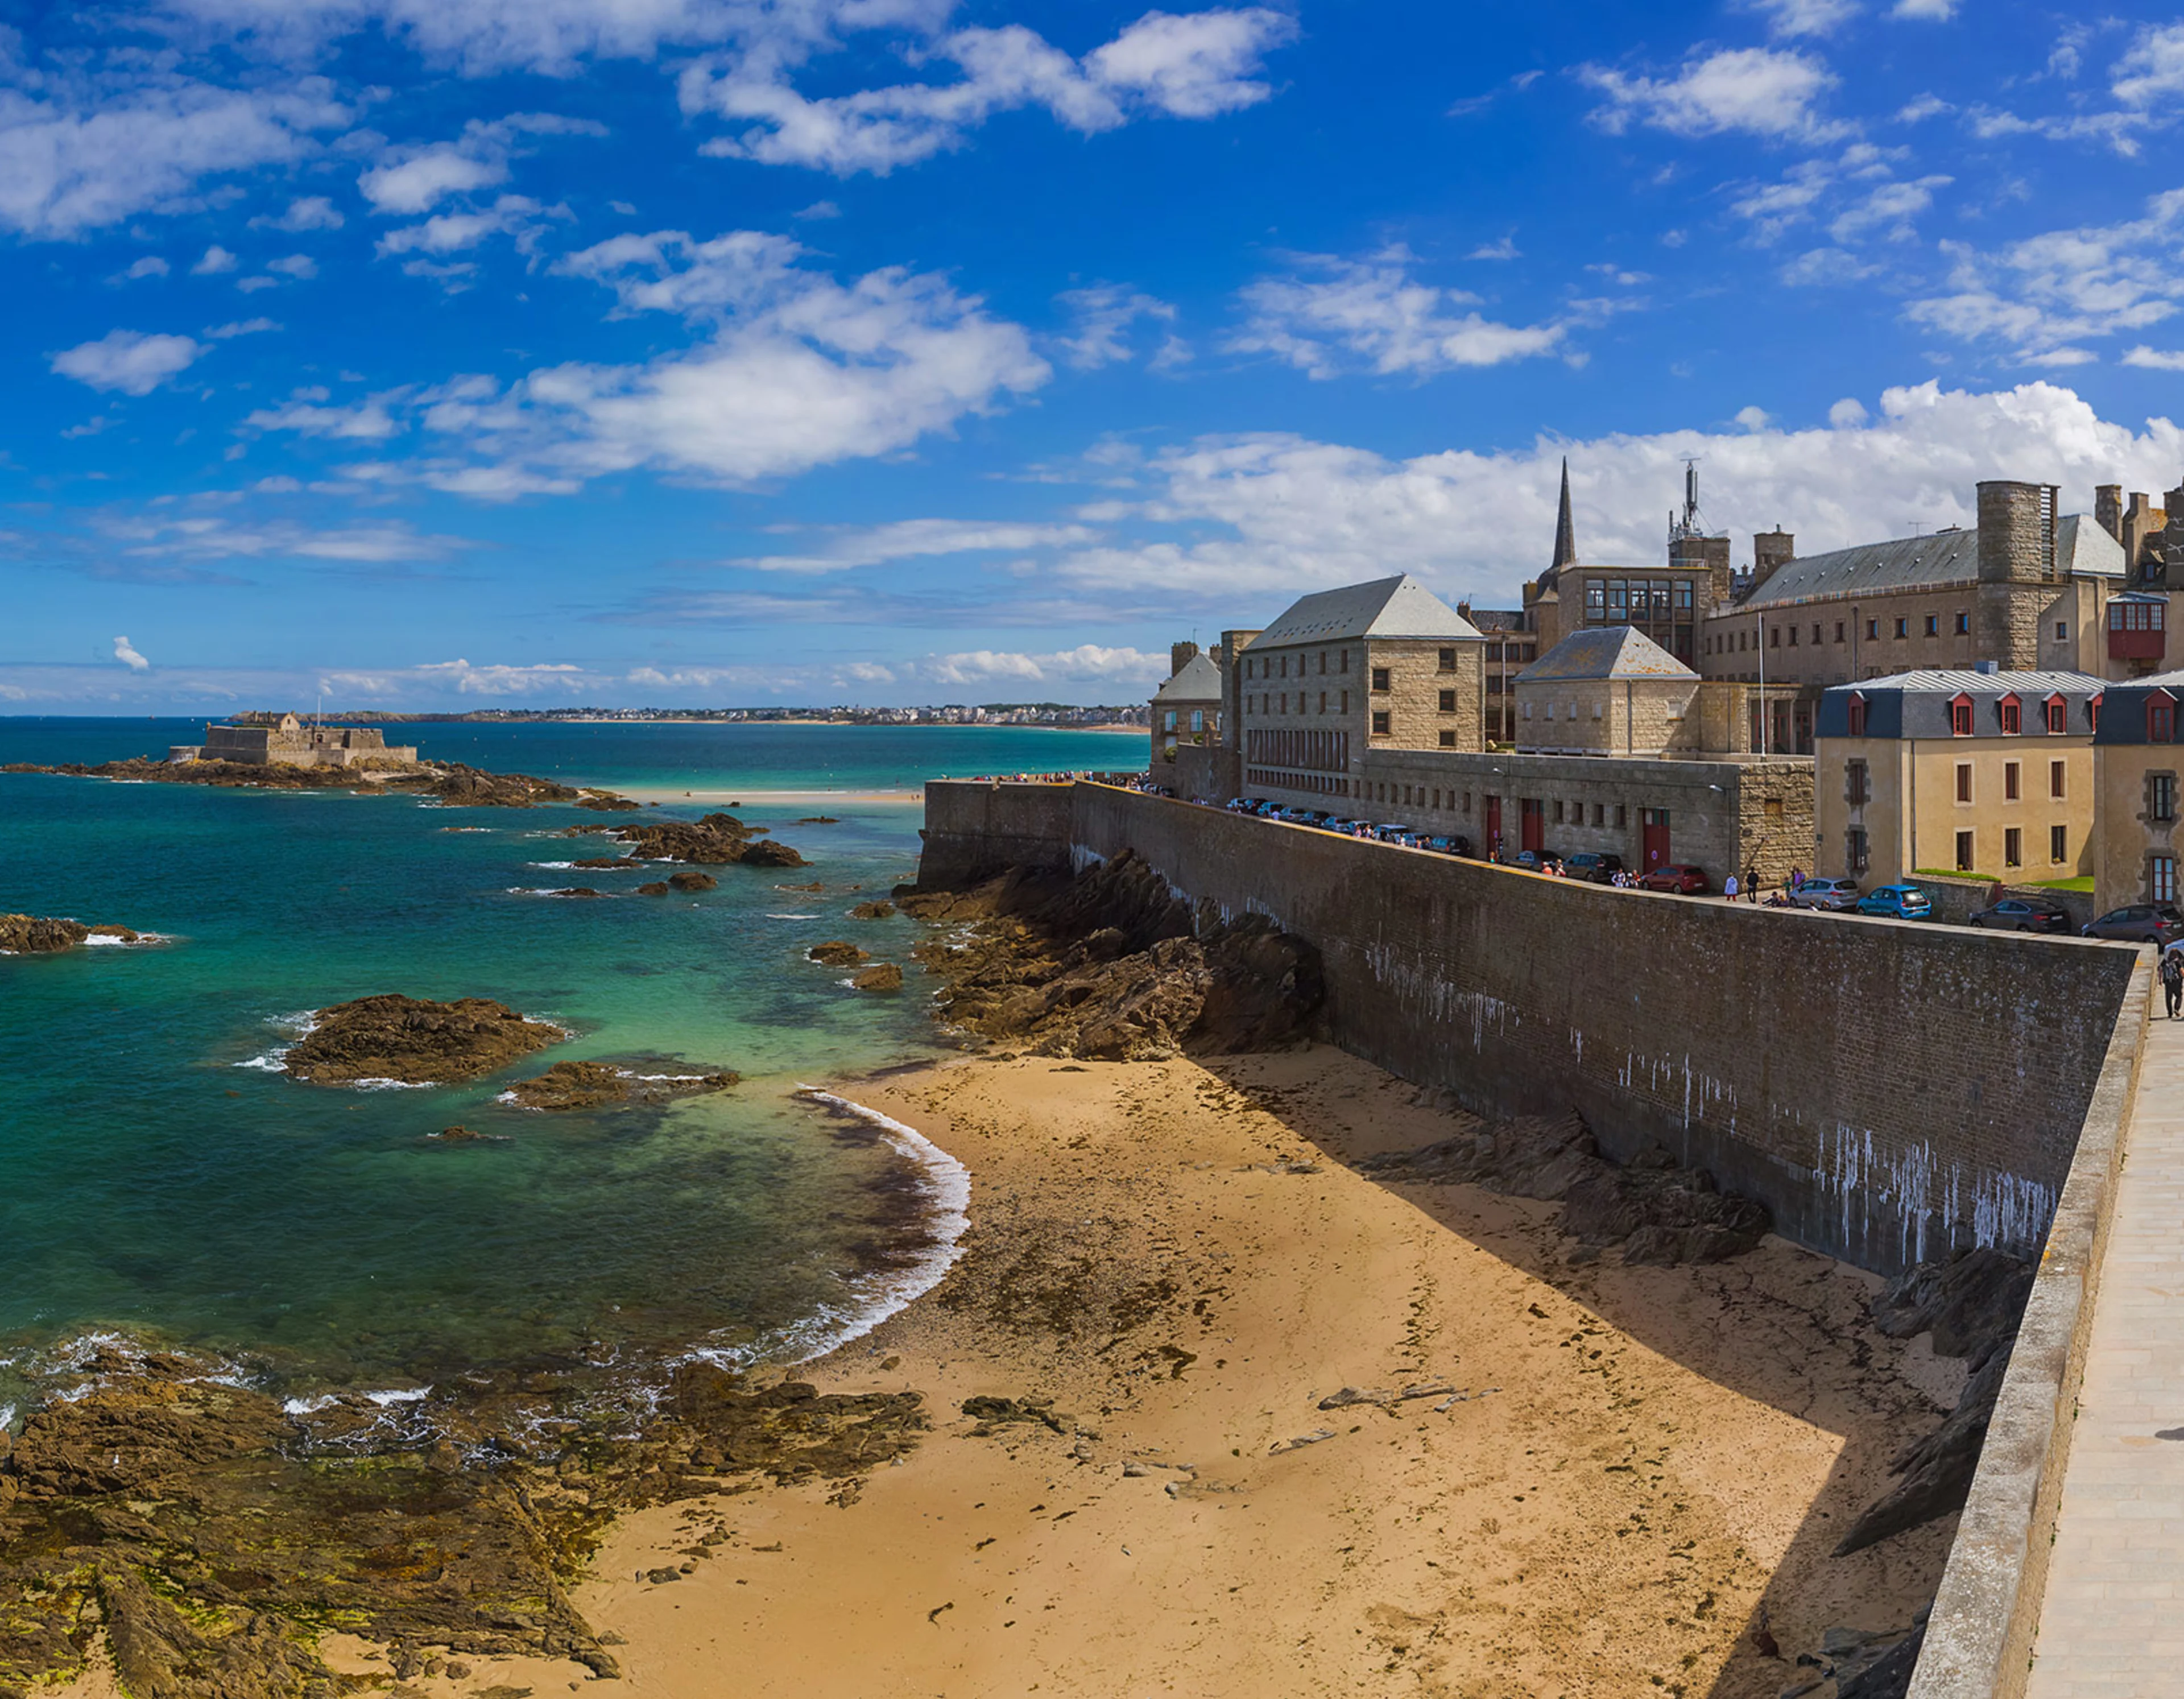 Castle nestled within the ramparts of Saint-Malo